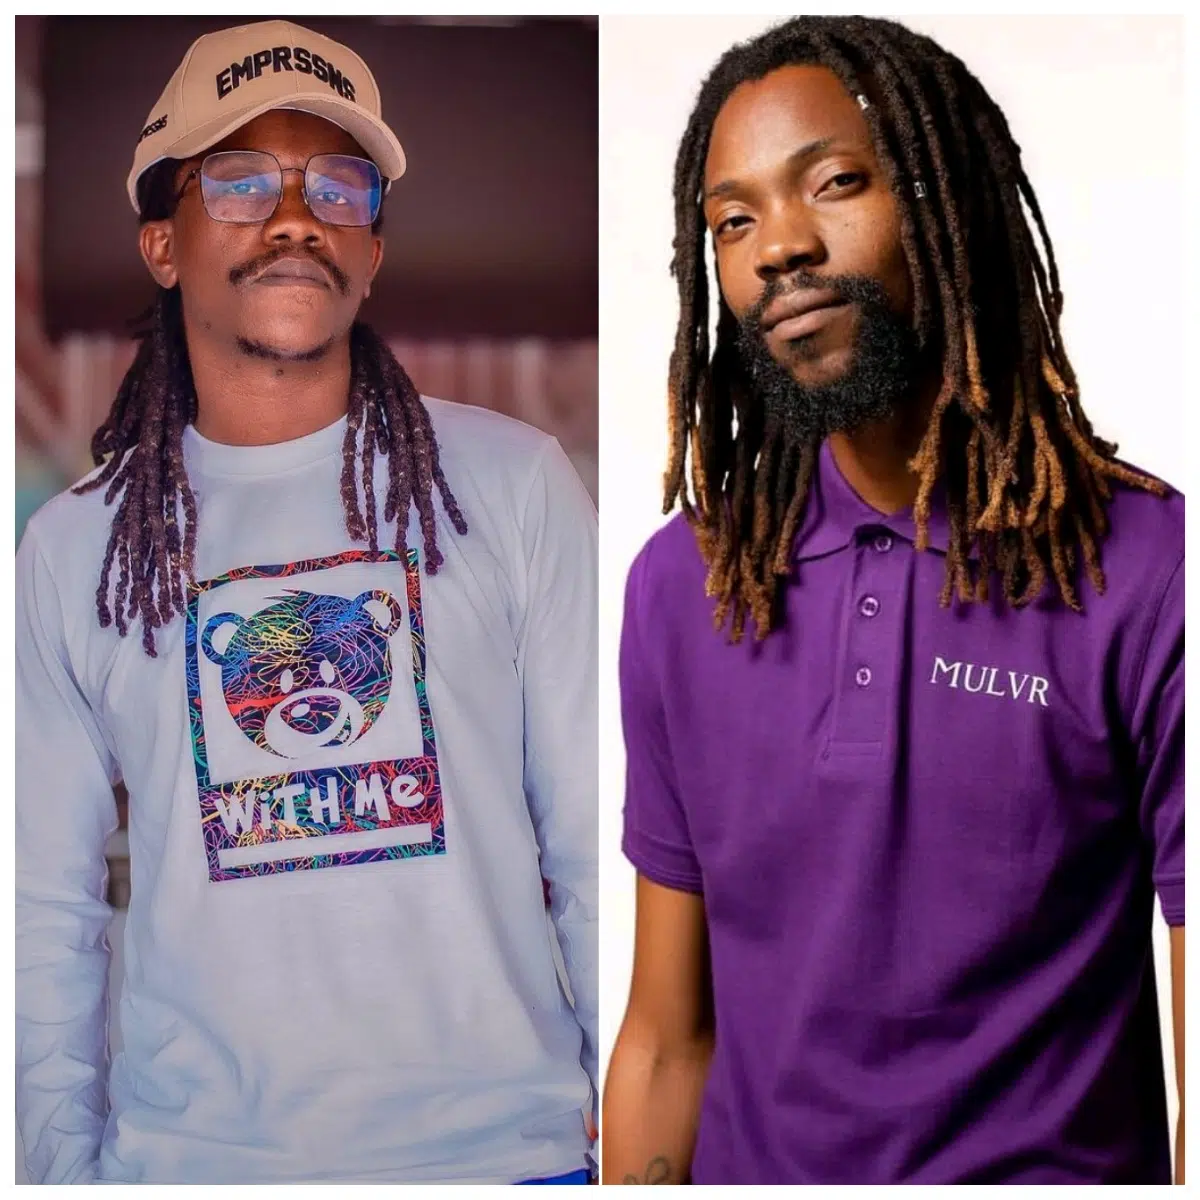 DOWNLOAD: Jay Rox Feat TIM – “Glory” Mp3